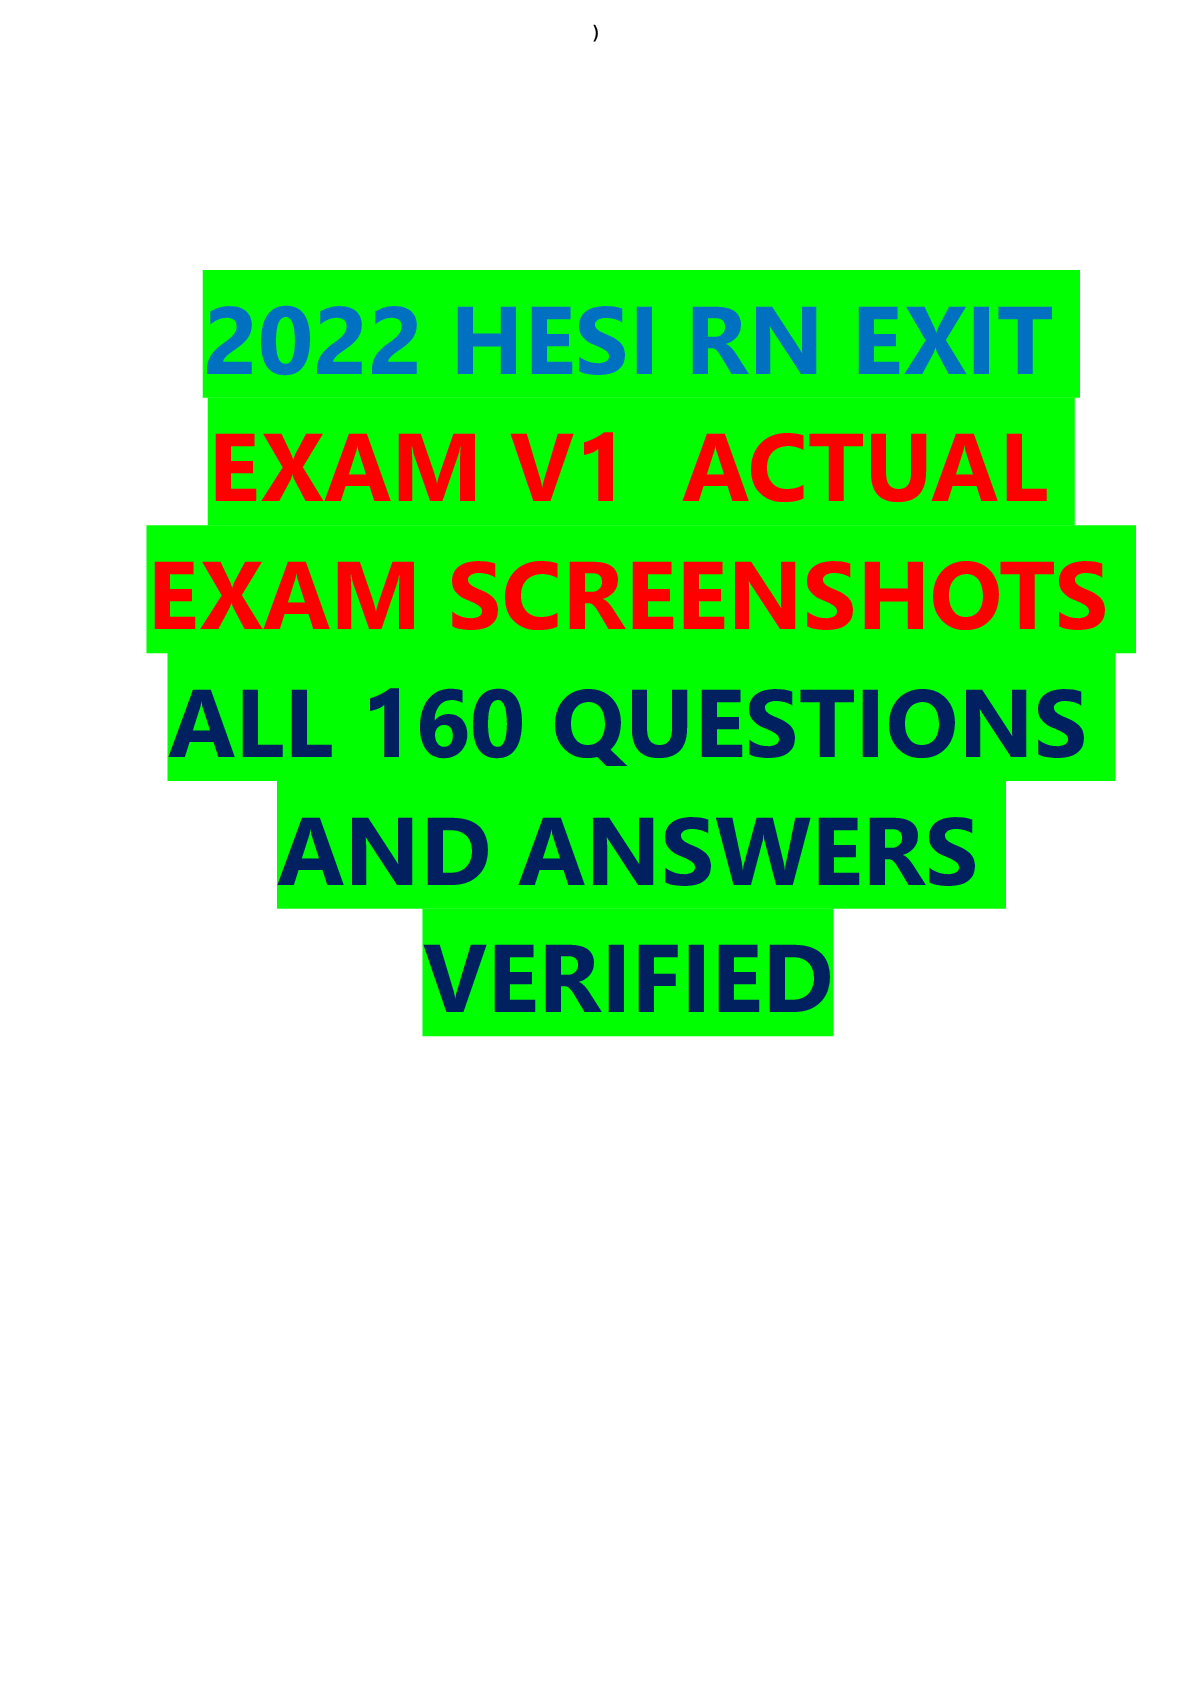 2022 HESI RN EXIT EXAM V1 ACTUAL EXAM SCREENSHOTS ALL 160 QUESTIONS AND